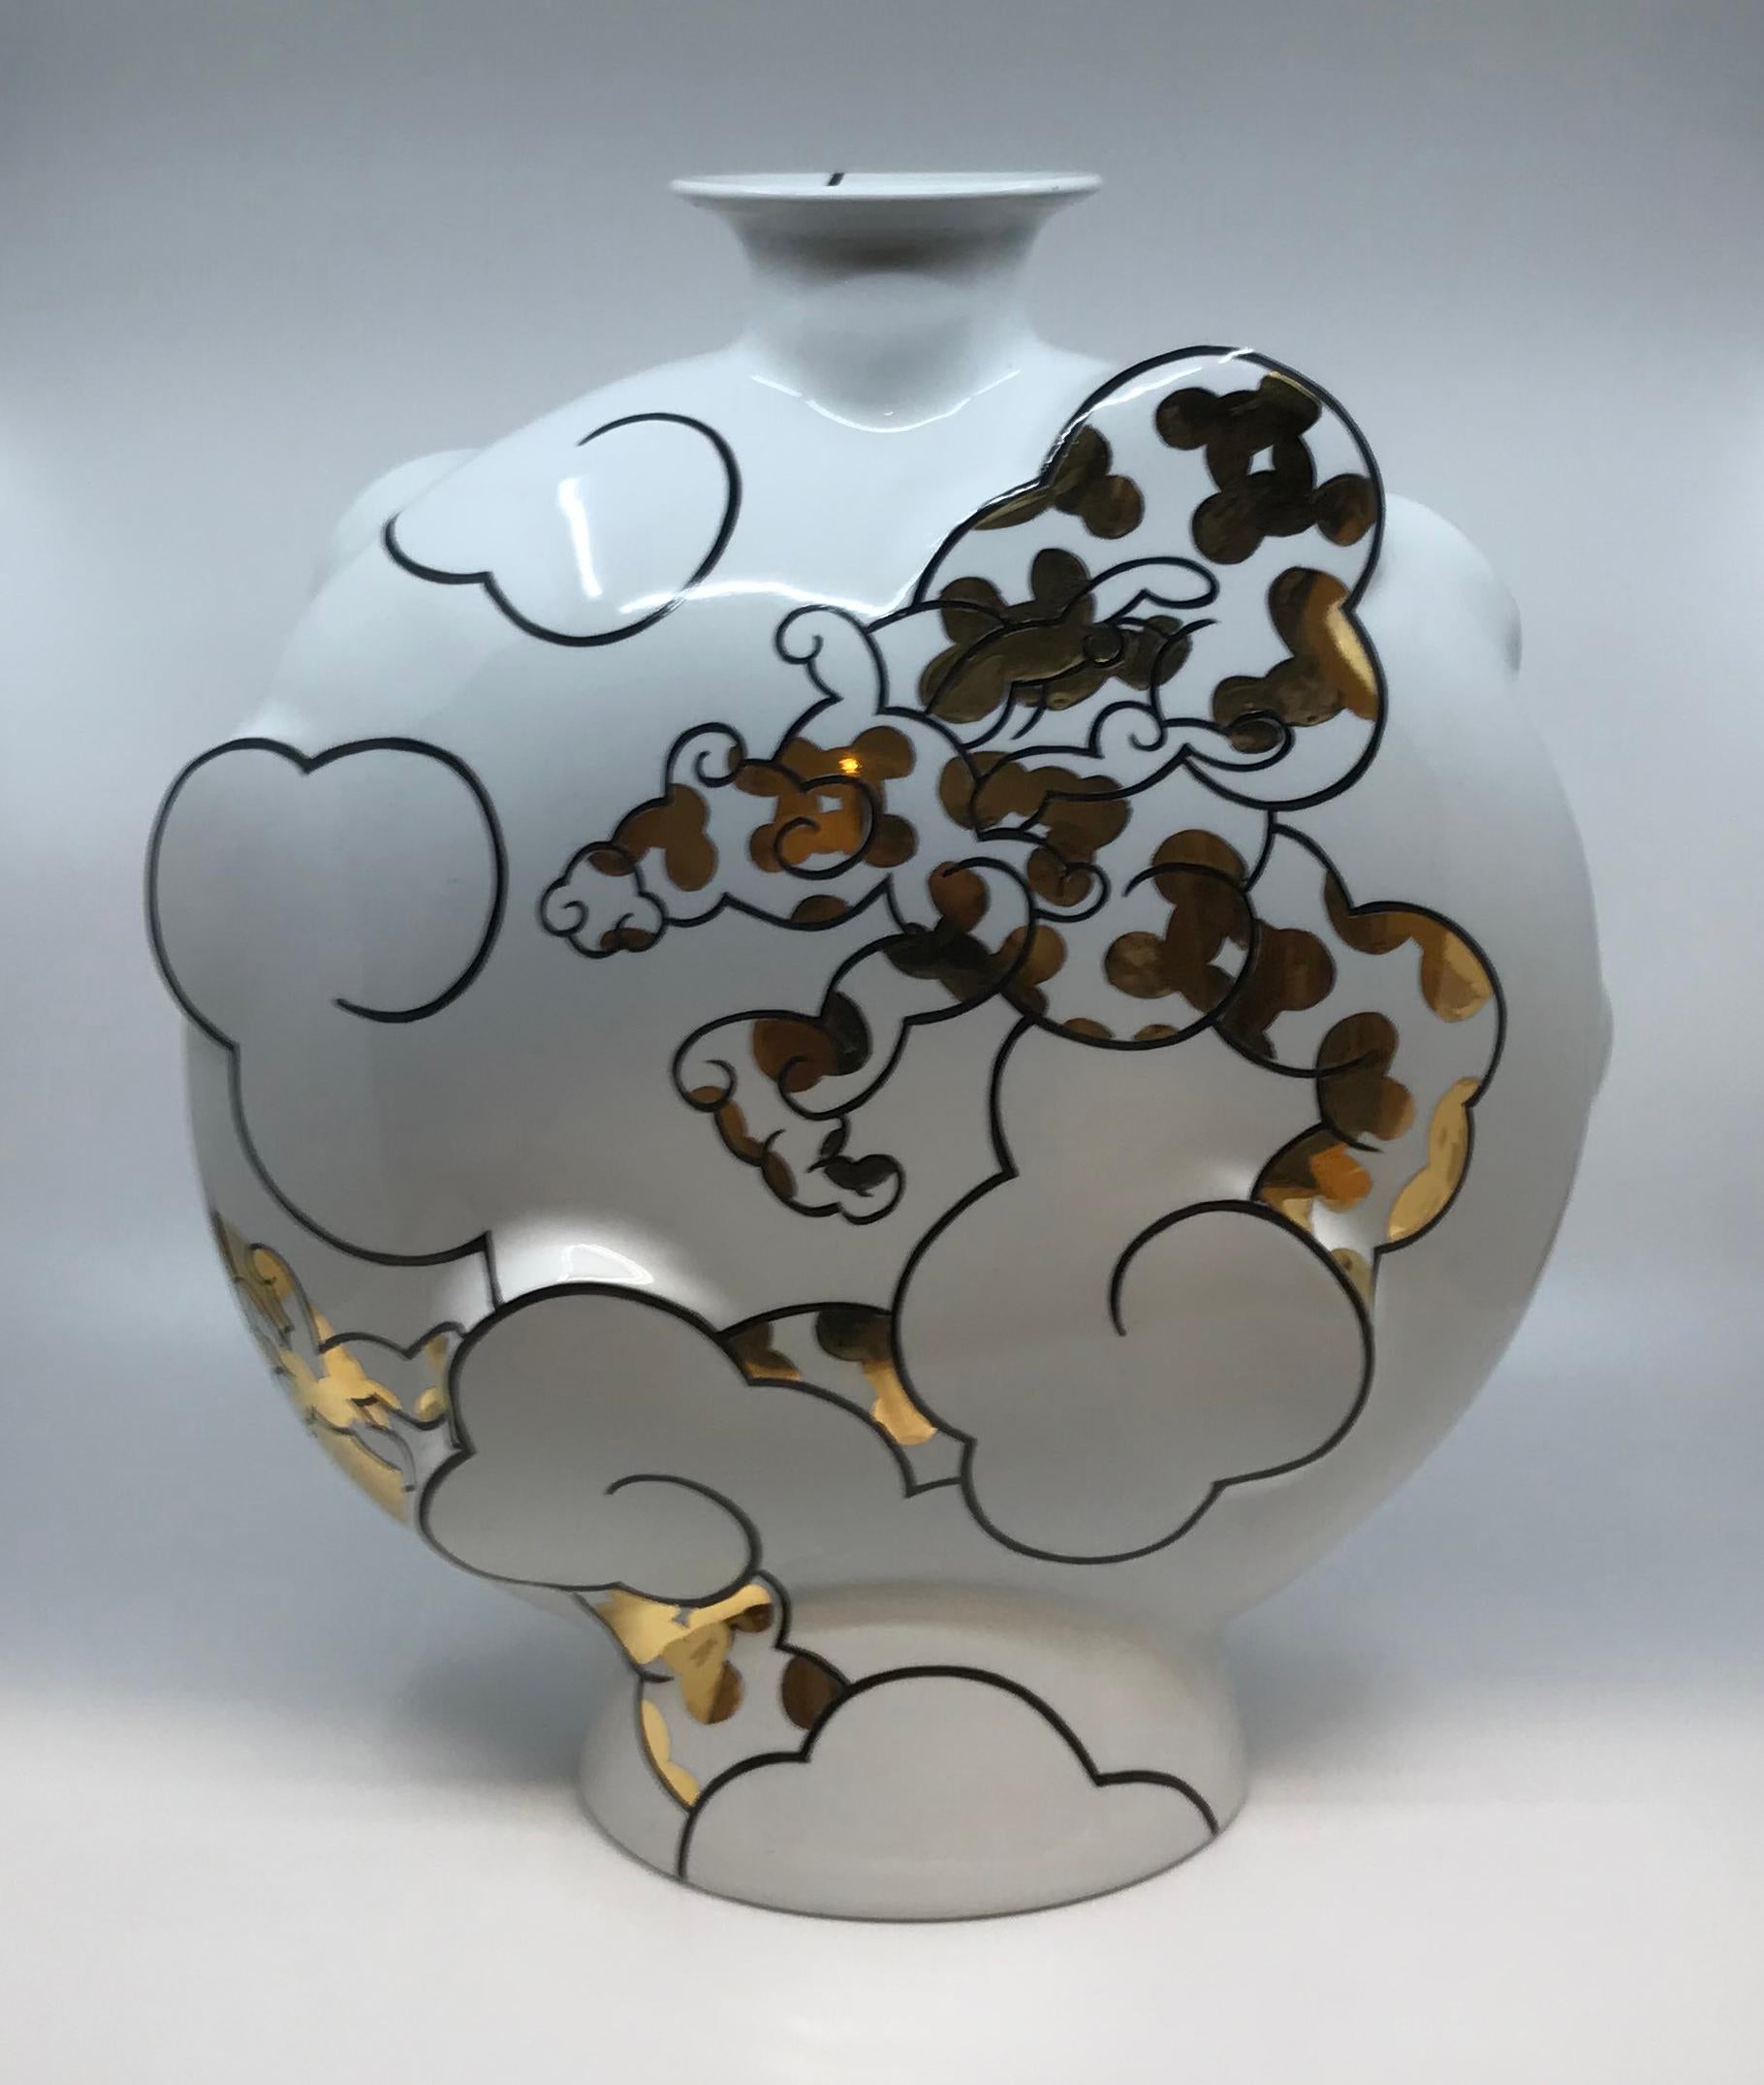 Sam Chung Abstract Sculpture - "Gold Camo Dragon Flask", Porcelain Sculpture with Gold Dragon Illustration